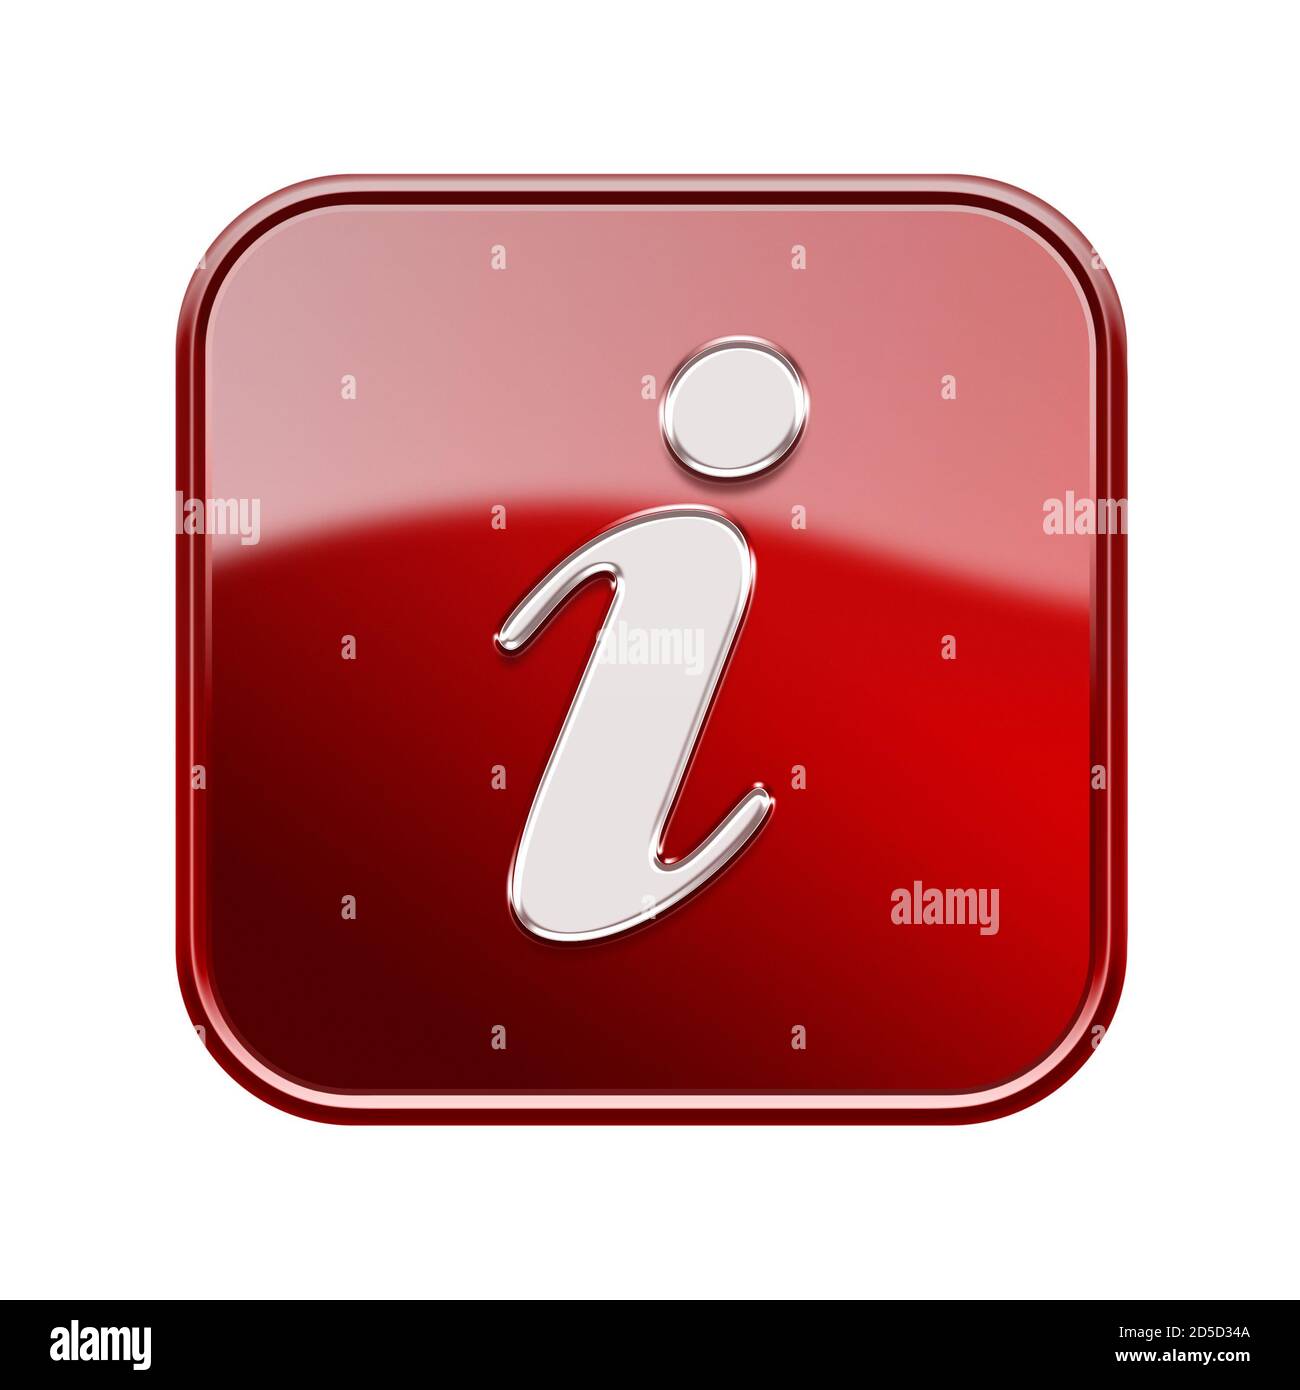 Information icon glossy red, isolated on white background Stock Photo